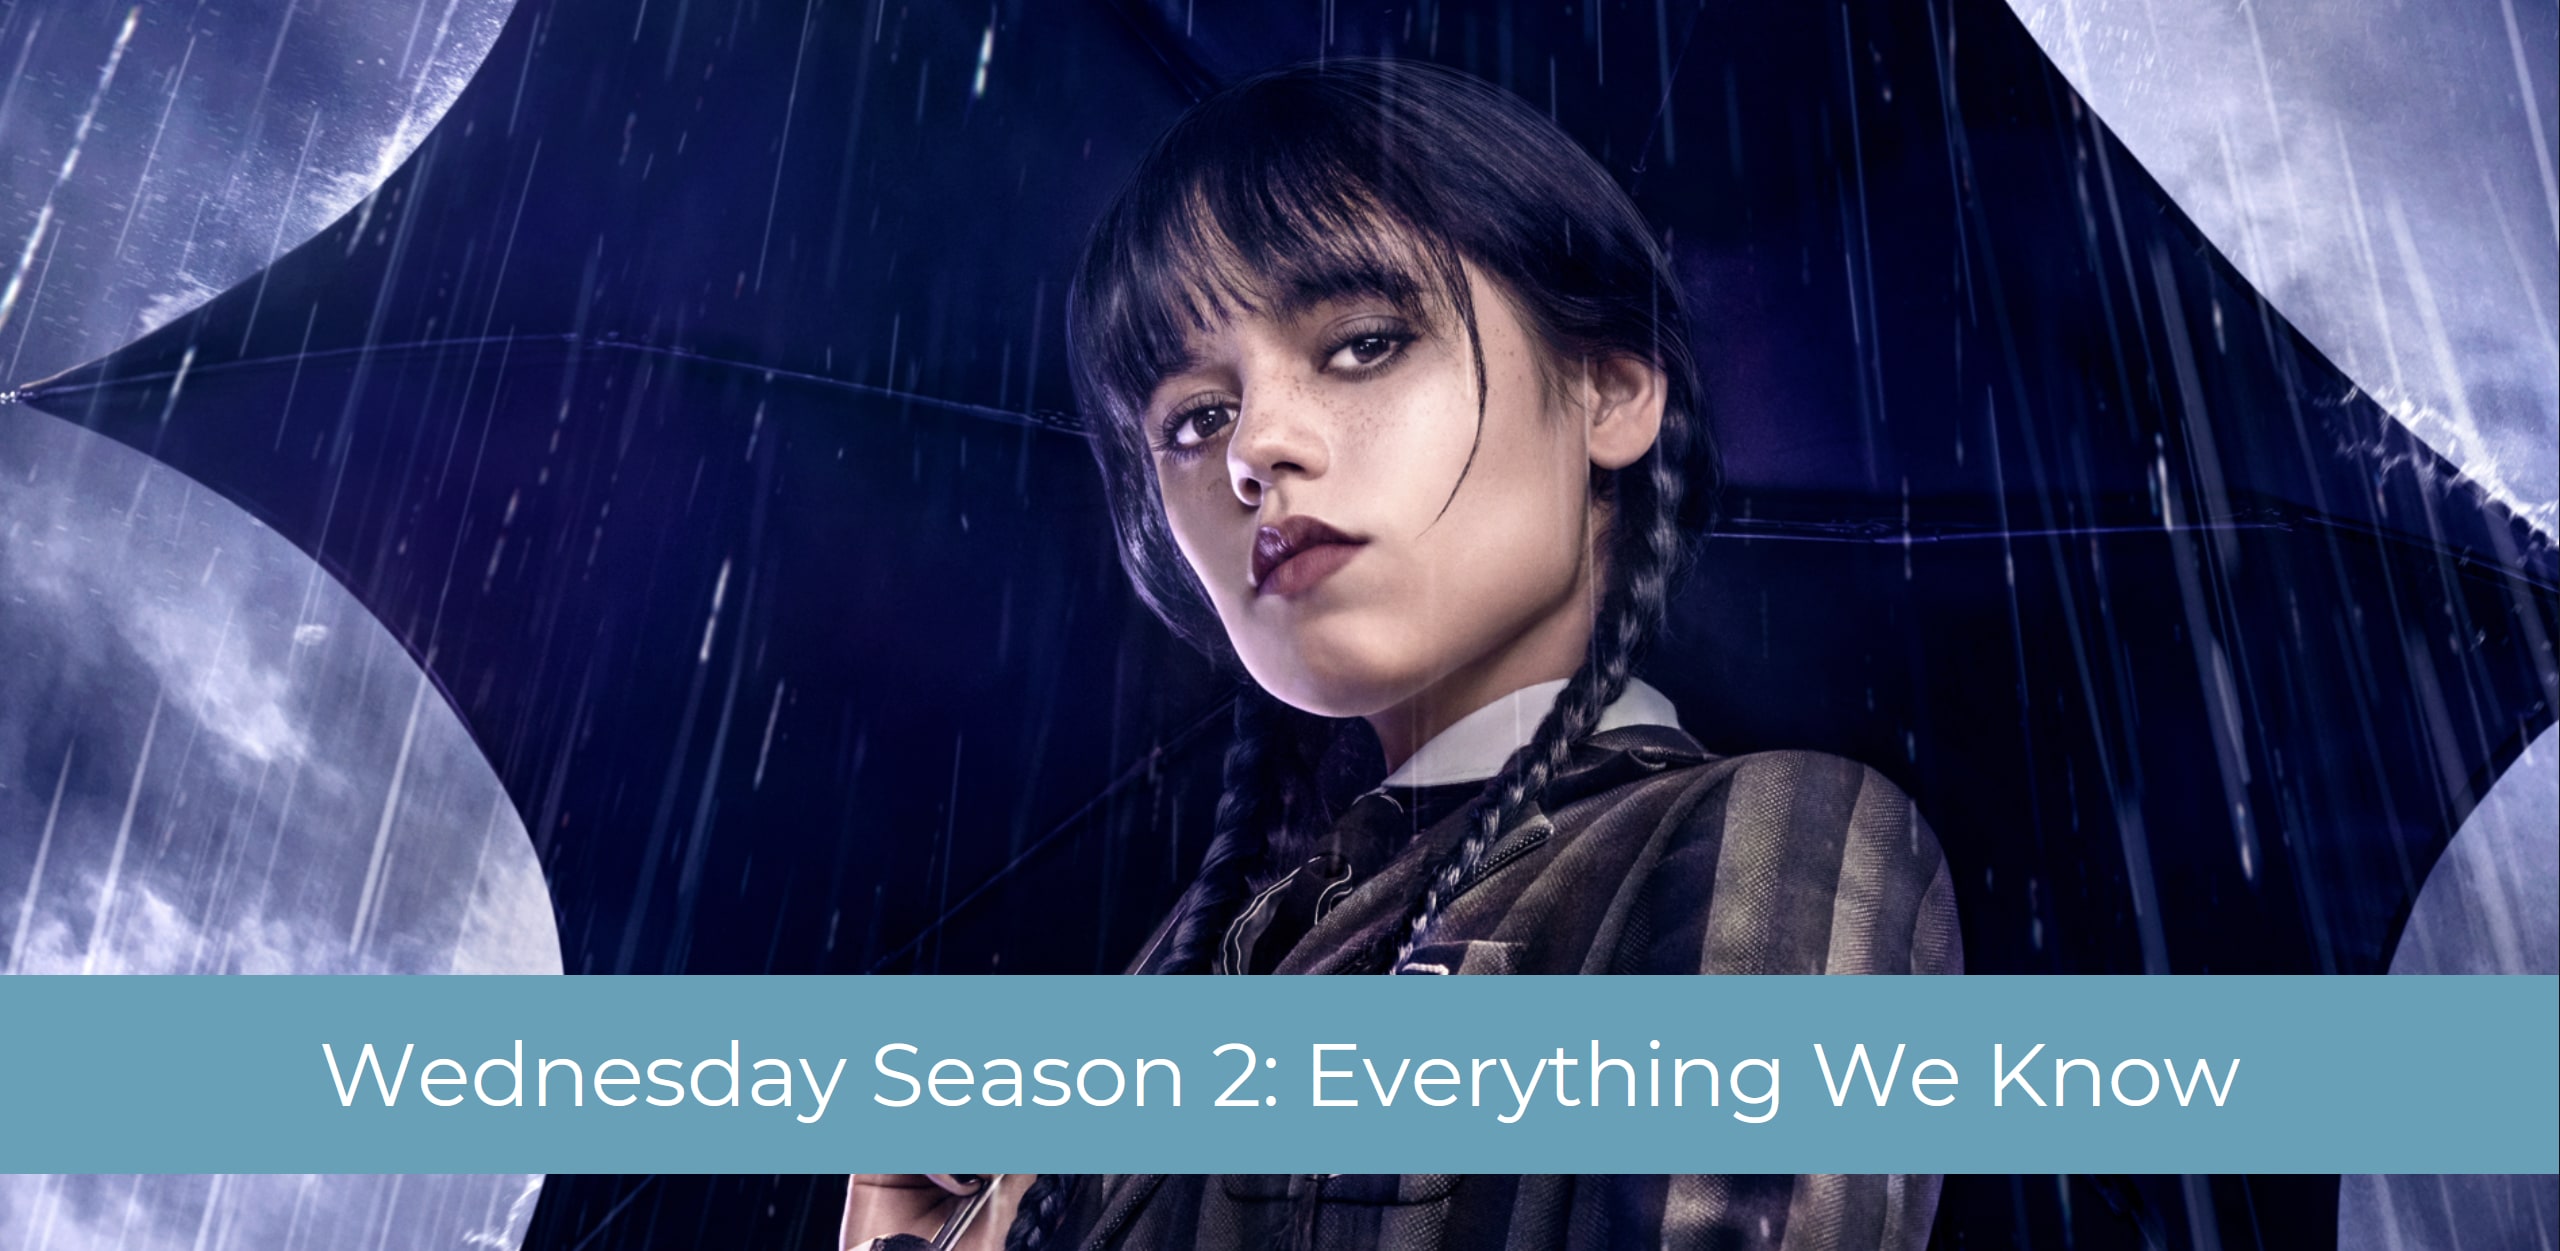 Wednesday' Season 2: Release Date Estimate & Everything We Know